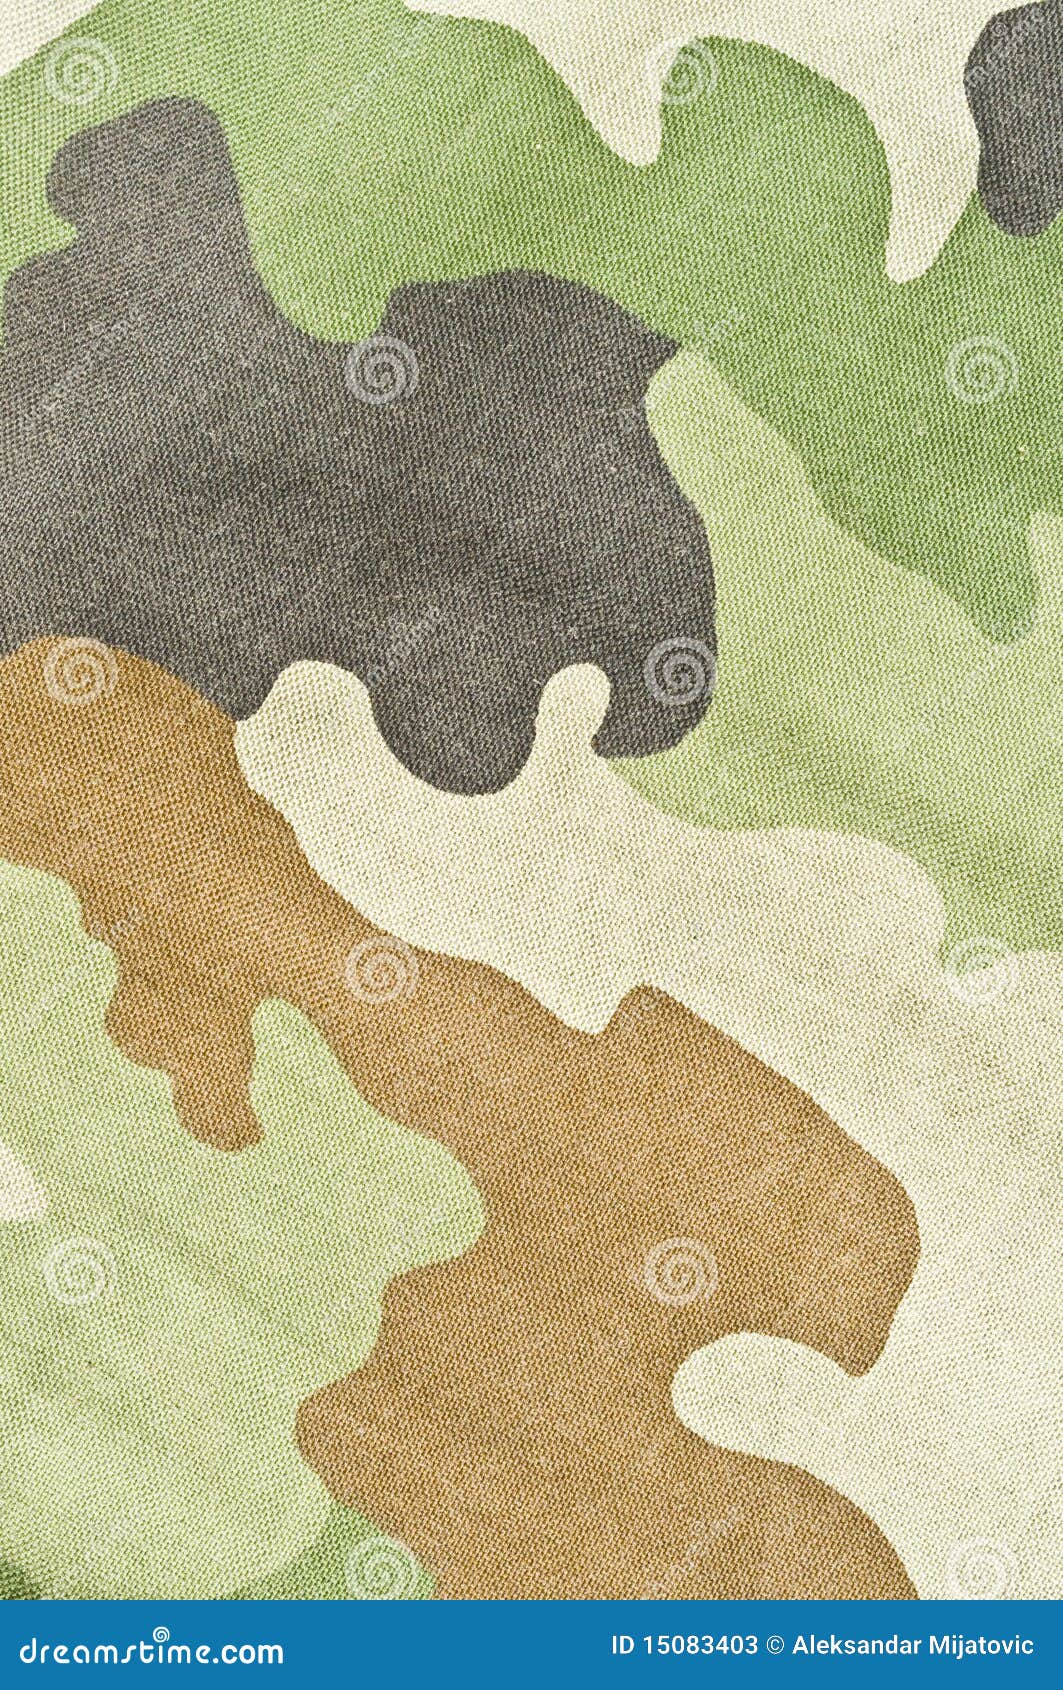 Army texture stock image. Image of close, material, marine - 15083403